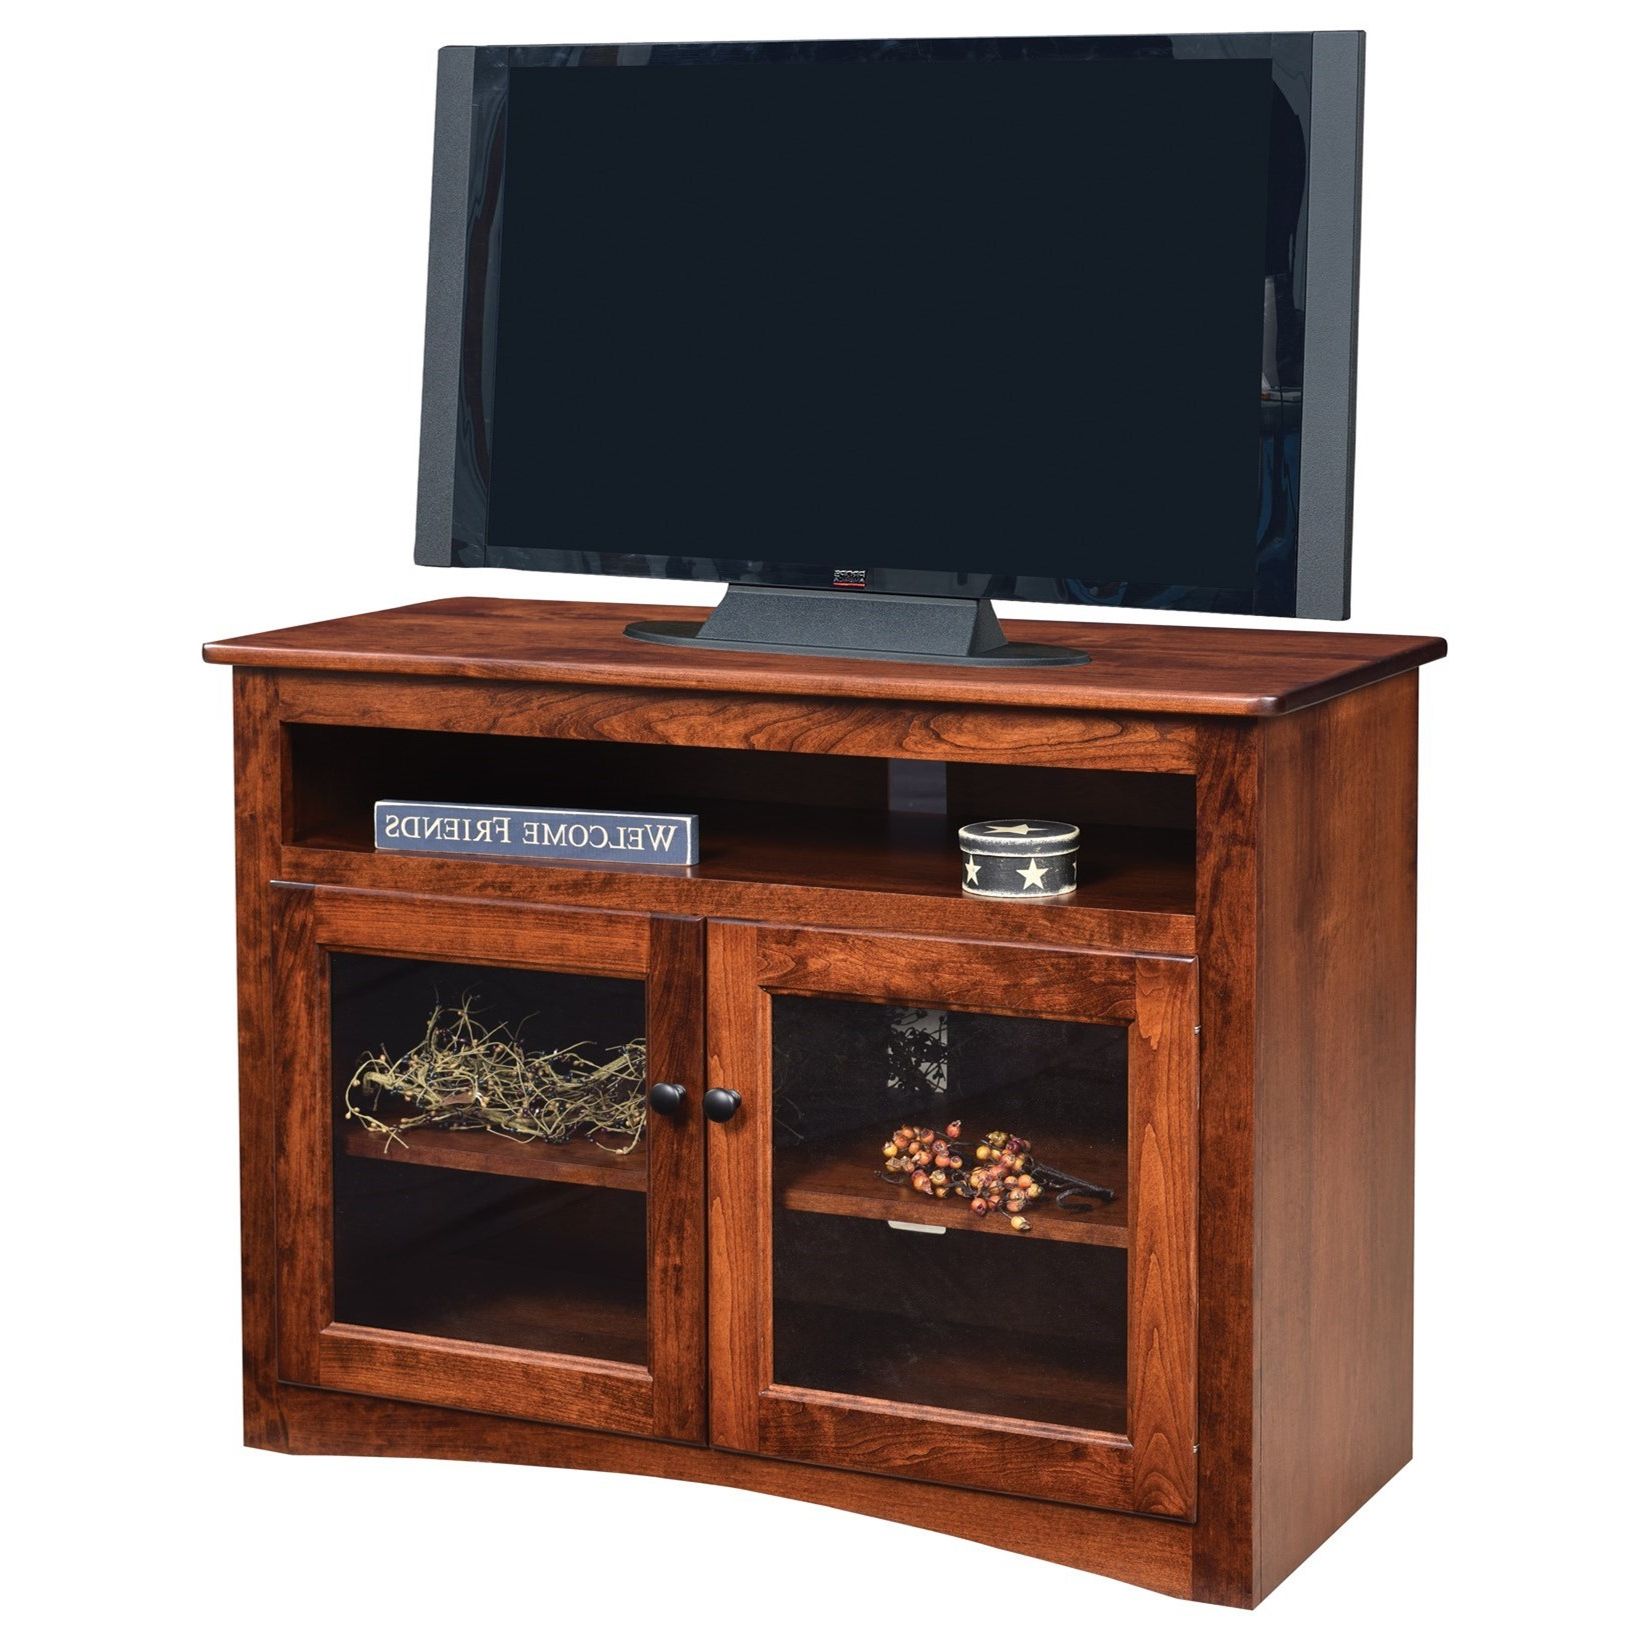 Ashery Oak Economy 40" Customizable Solid Wood Tv Stand In Modern Tv Stands In Oak Wood And Black Accents With Storage Doors (View 2 of 20)